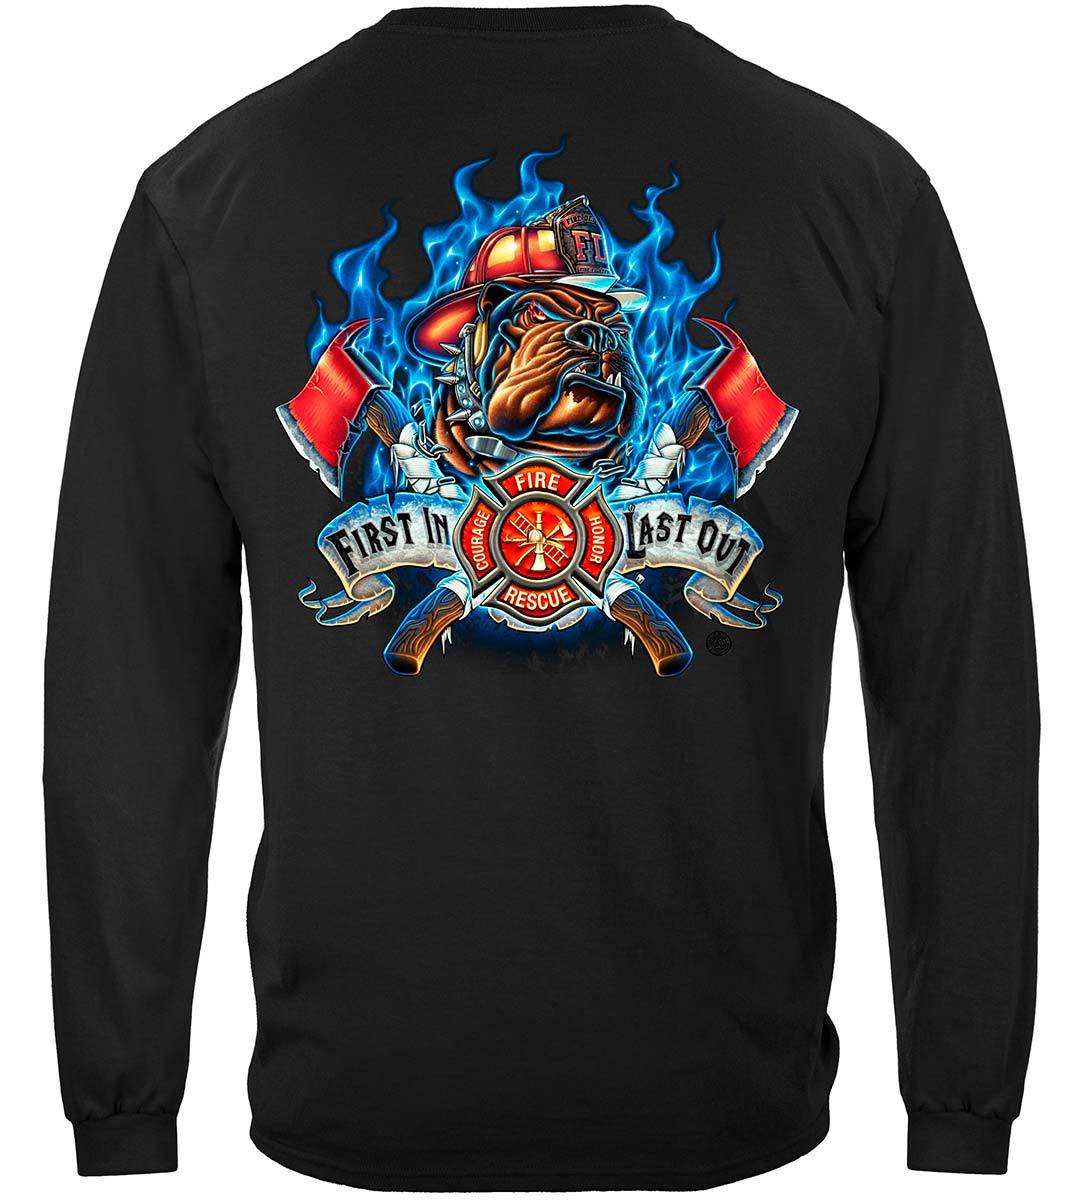 Firefighter Fire Dog First in Last Out Premium Long Sleeves